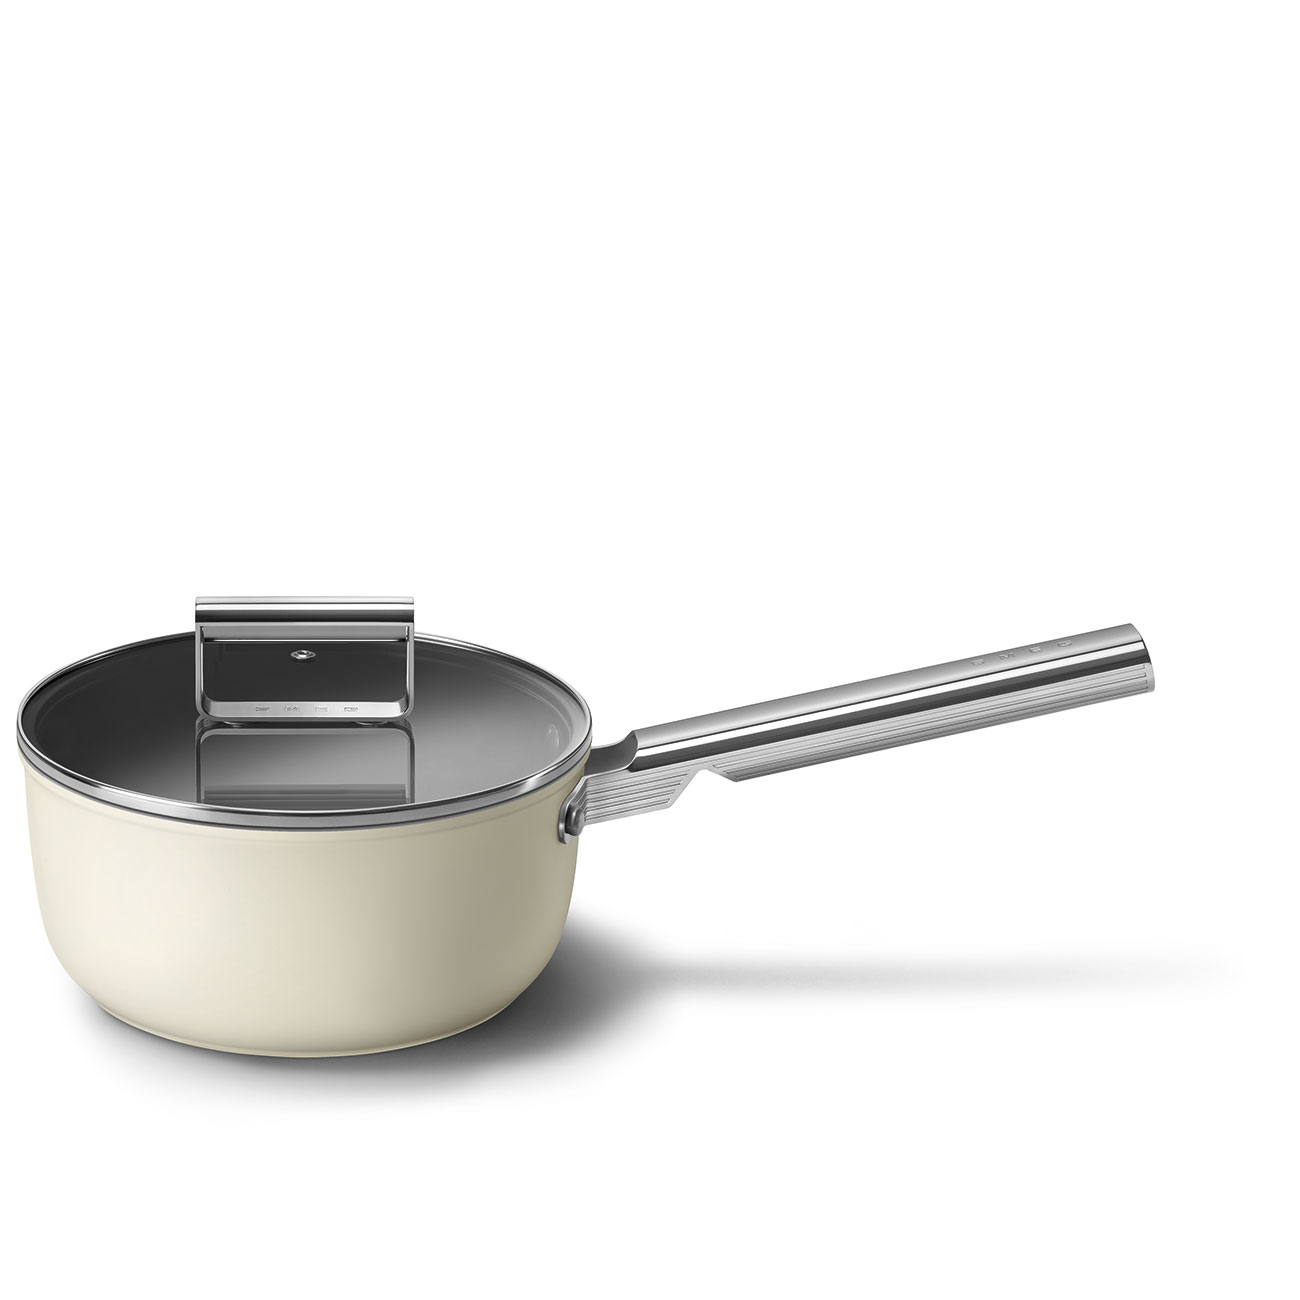 Smeg Cream Non-stick Saucepan with glass lid and stainless steel handle_11